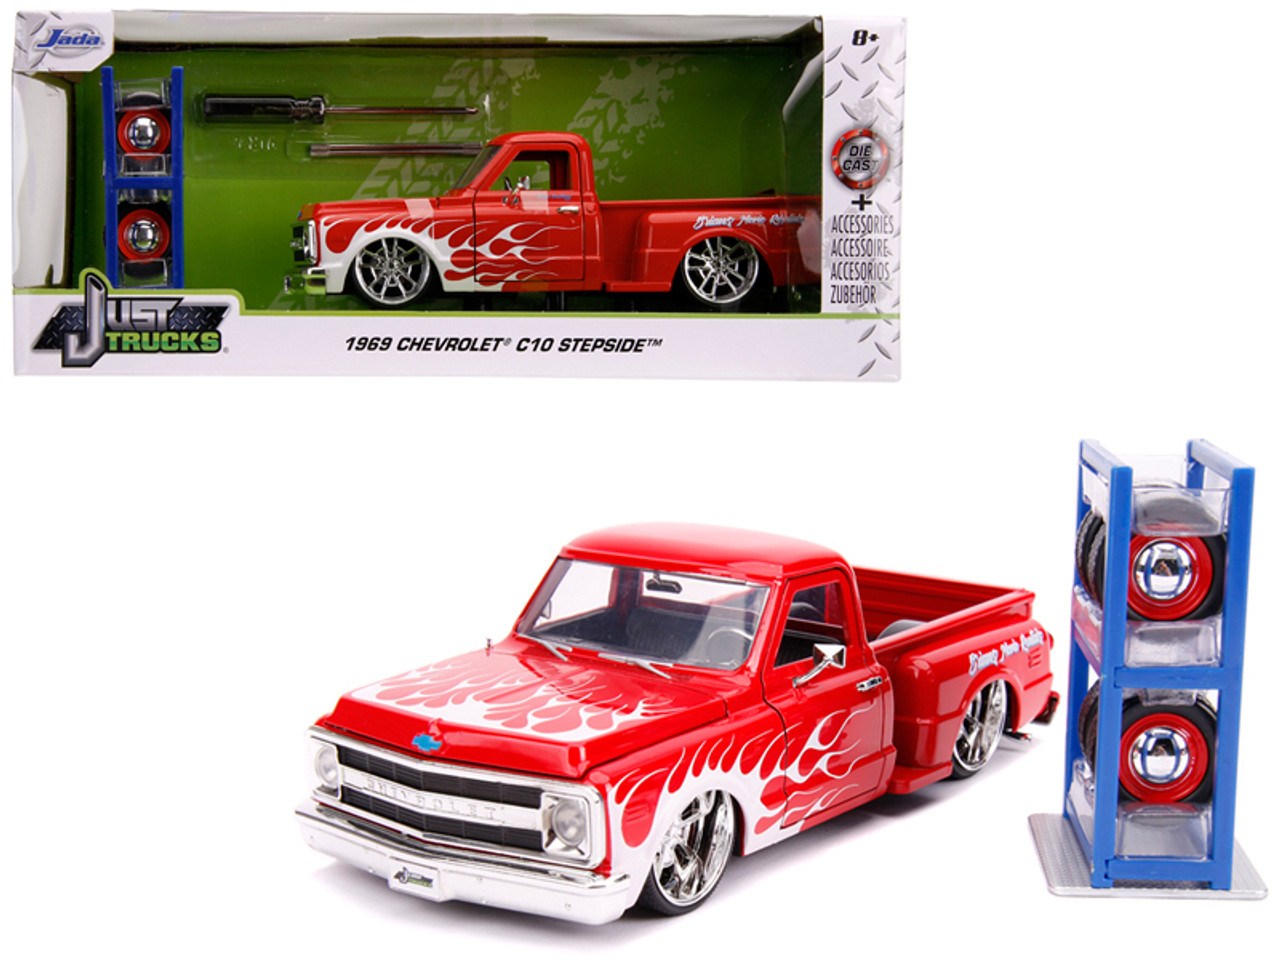 1969 Chevrolet C10 Stepside Pickup Truck Red with White Flames with Extra Wheels "Just Trucks" Series 1/24 Diecast Model Car by Jada